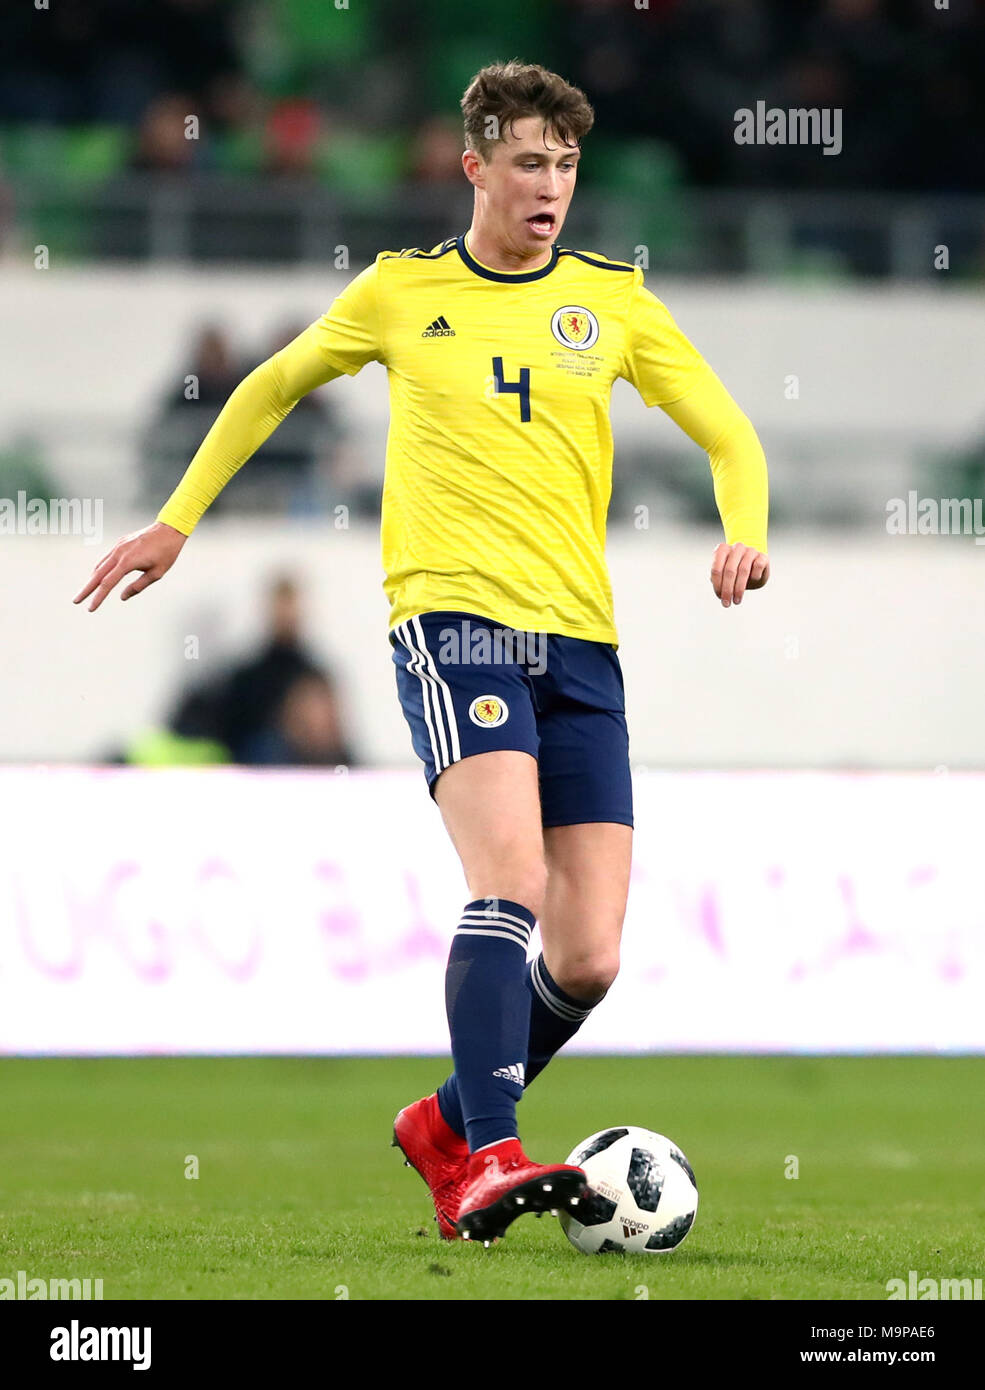 Scotland's Jack Hendry during the international friendly match at the Groupama Arena, Budapest. PRESS ASSOCIATION Photo. Picture date: Tuesday March 27, 2018. See PA story SOCCER Hungary. Photo credit should read: Tim Goode/PA Wire. Stock Photo